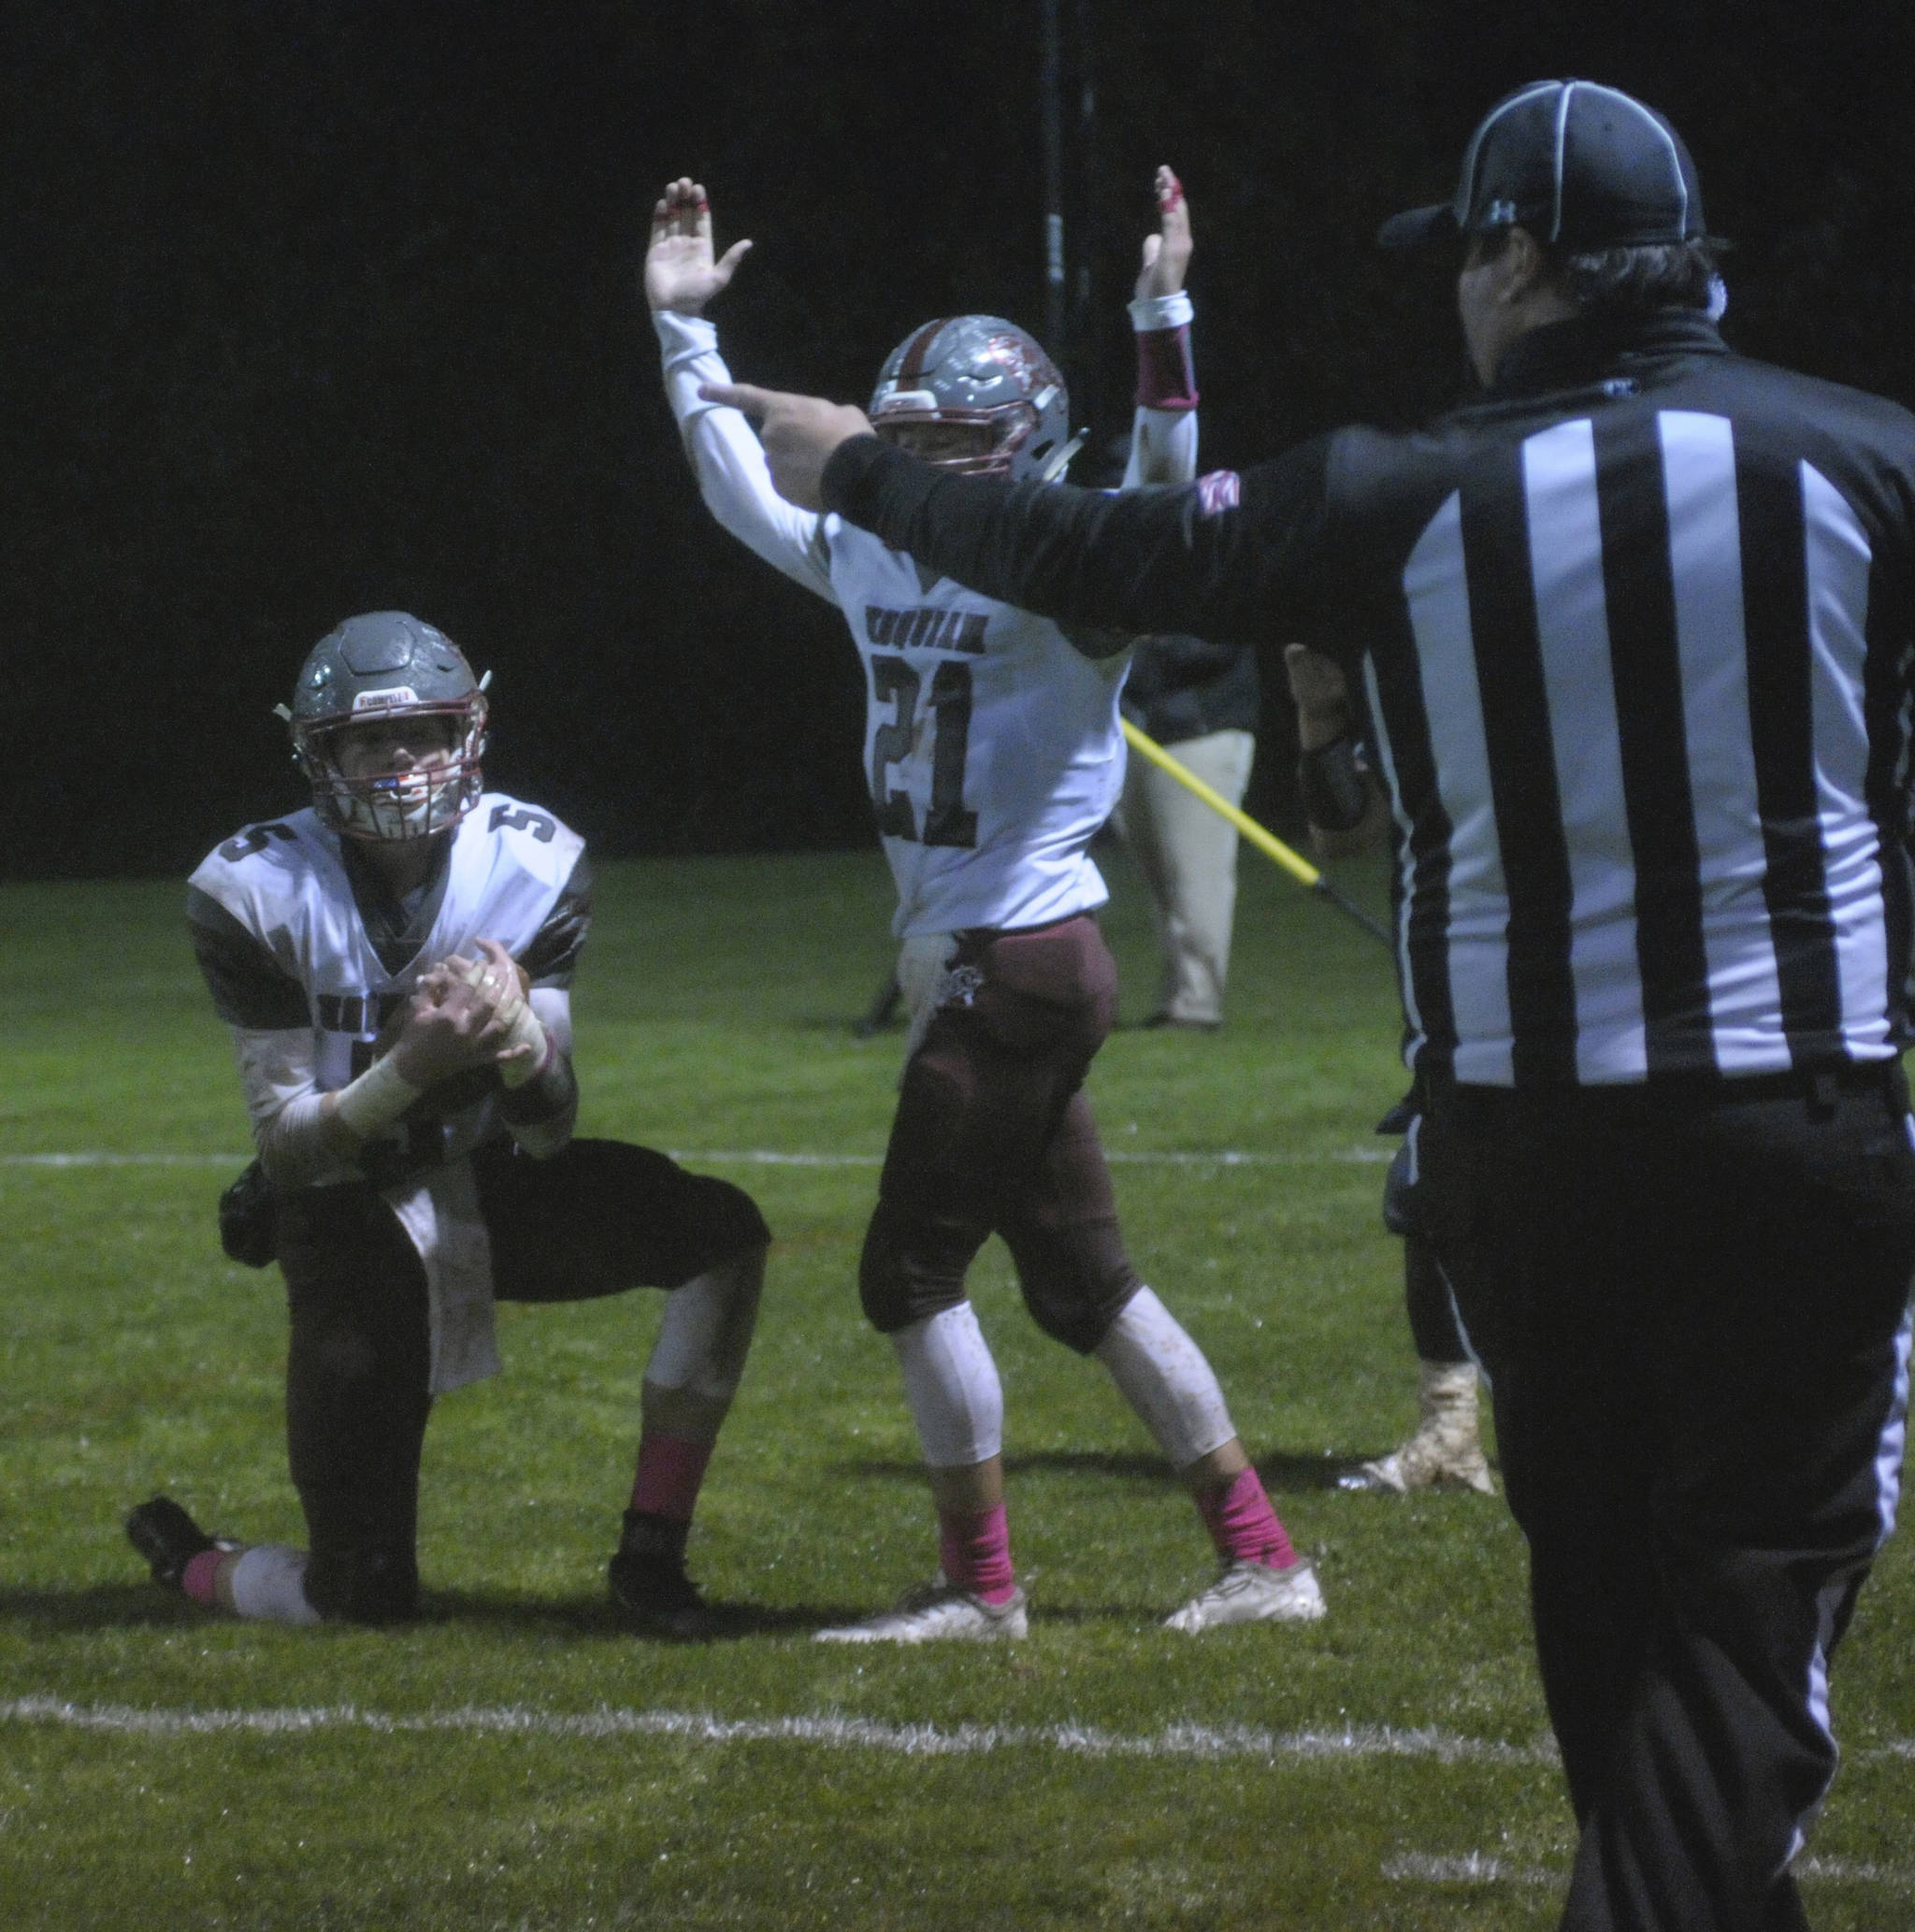 Hoquiam’s Kyle Larsen brings in a touchdown against Elma on Friday night. (Hasani Grayson | The Daily World)